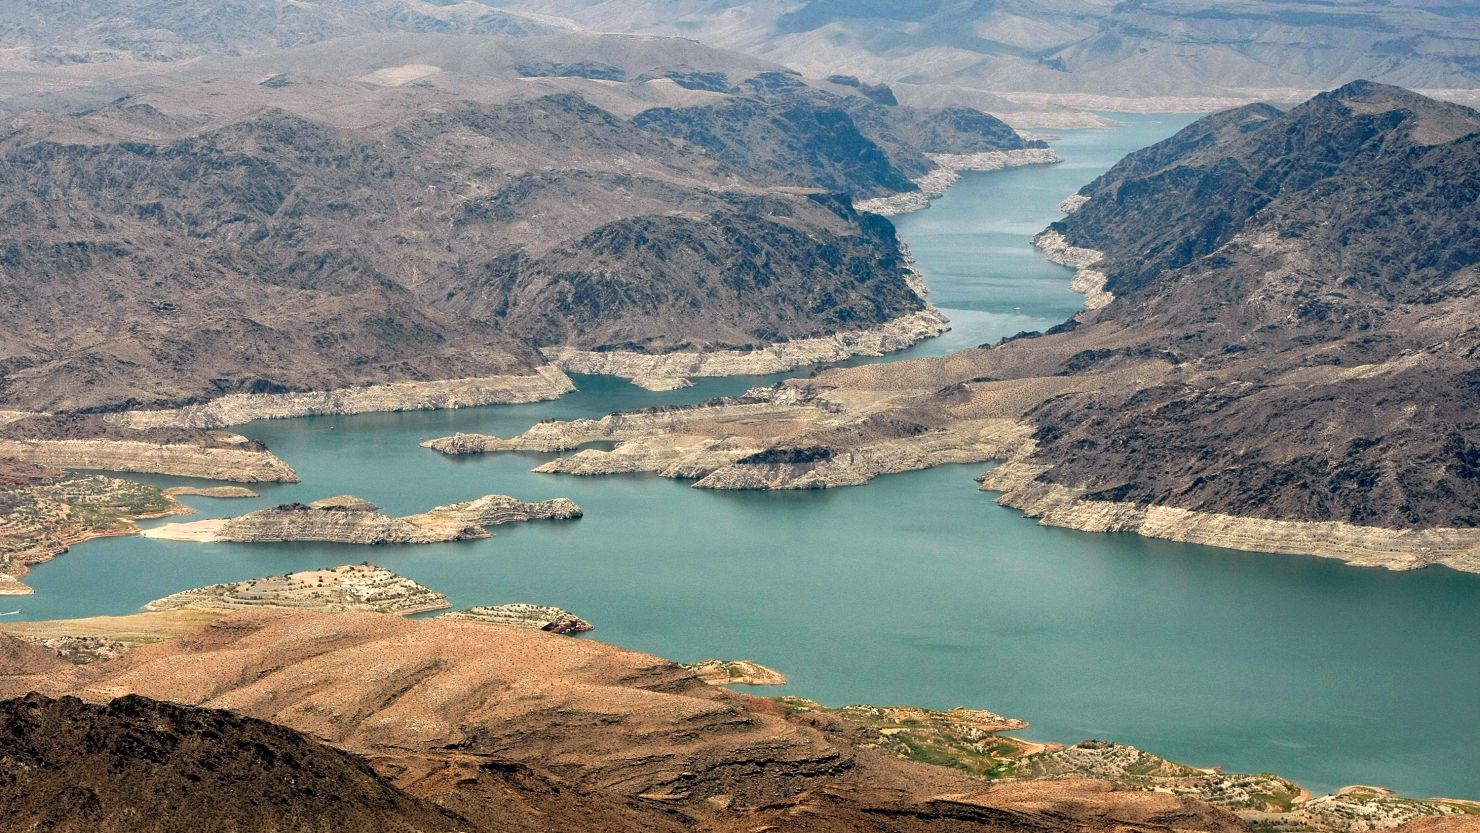 An aerial view of the Lake Mead National Recreation Area, Arizona.